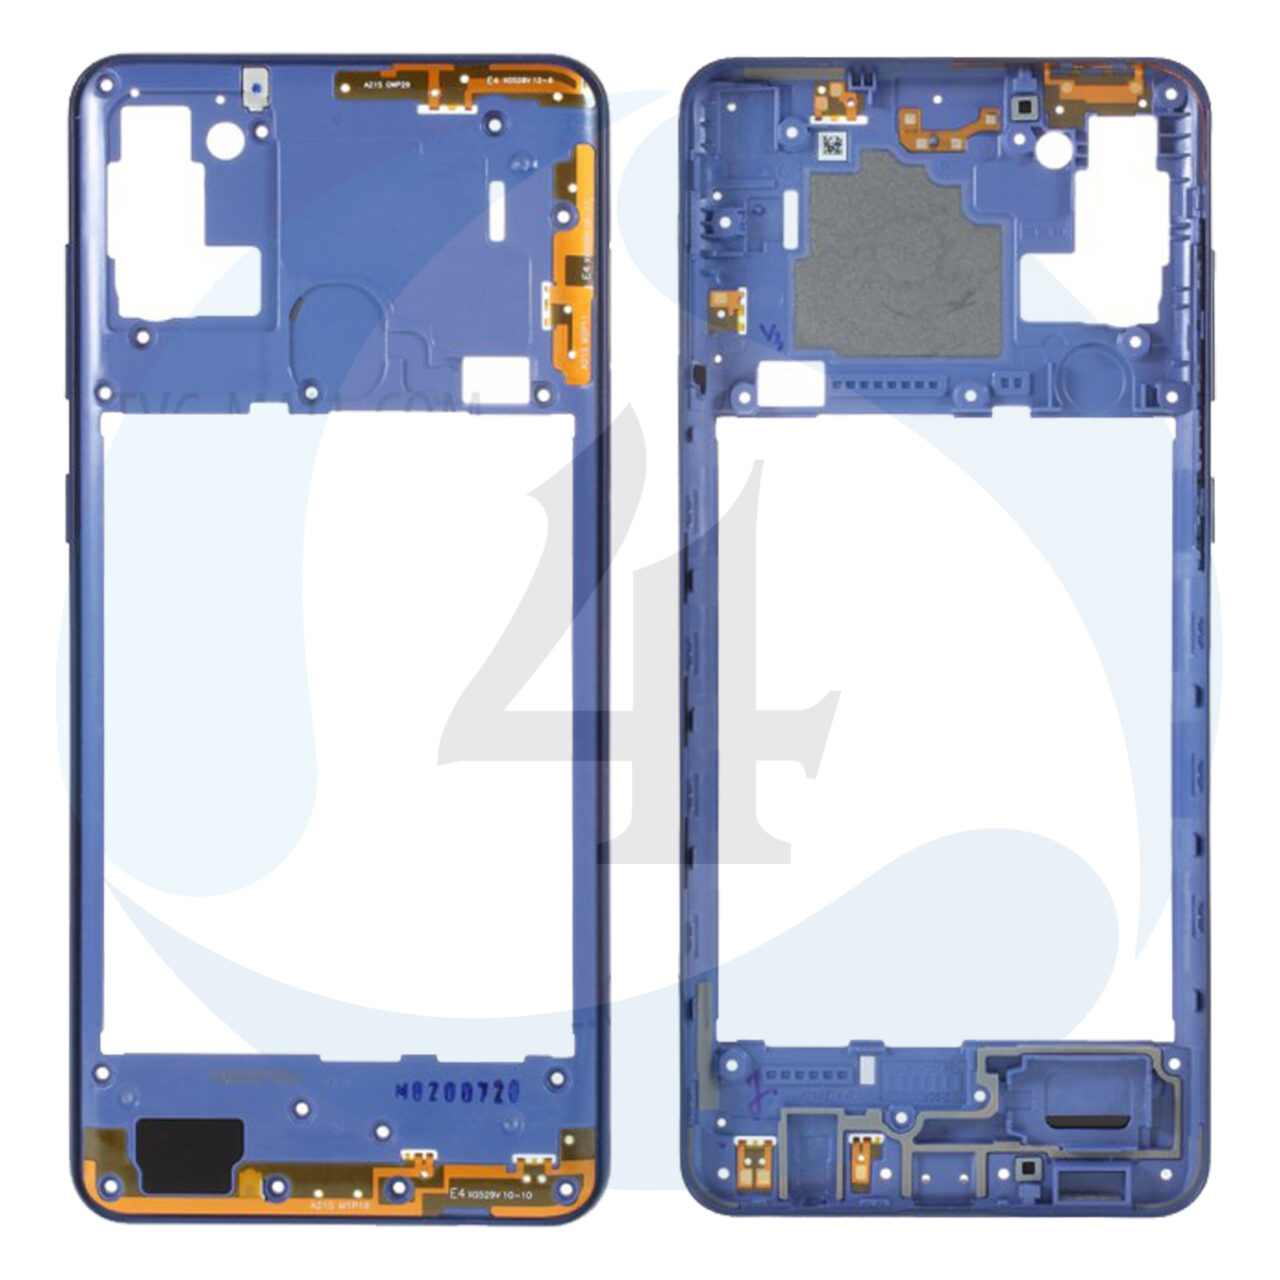 Samsung Galaxy A21s SM A217 F DS Middle Frame Bezel Plate Cover blue